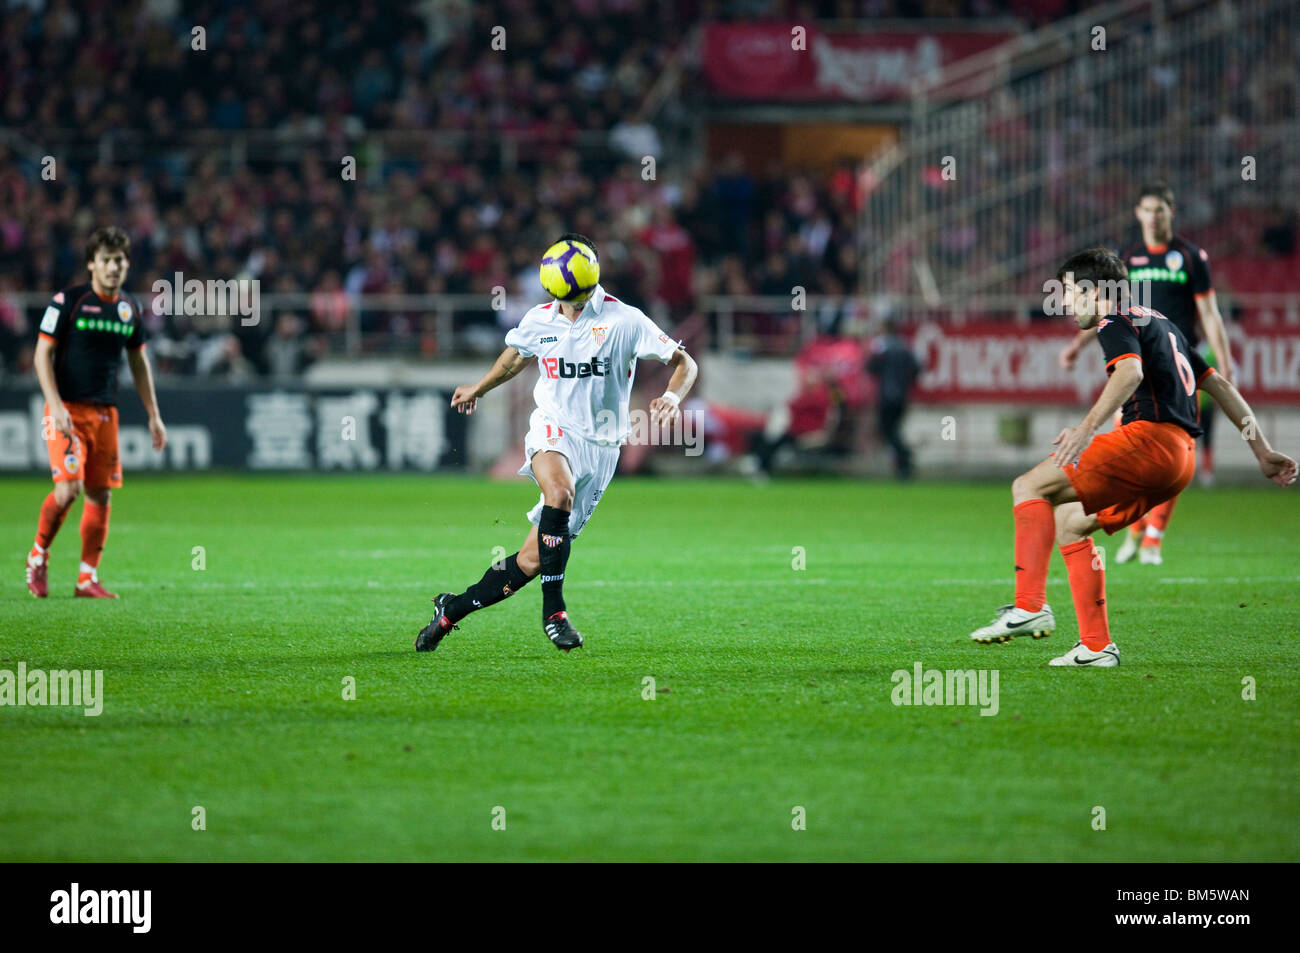 Renato pursues the ball watched by Albelda. Stock Photo